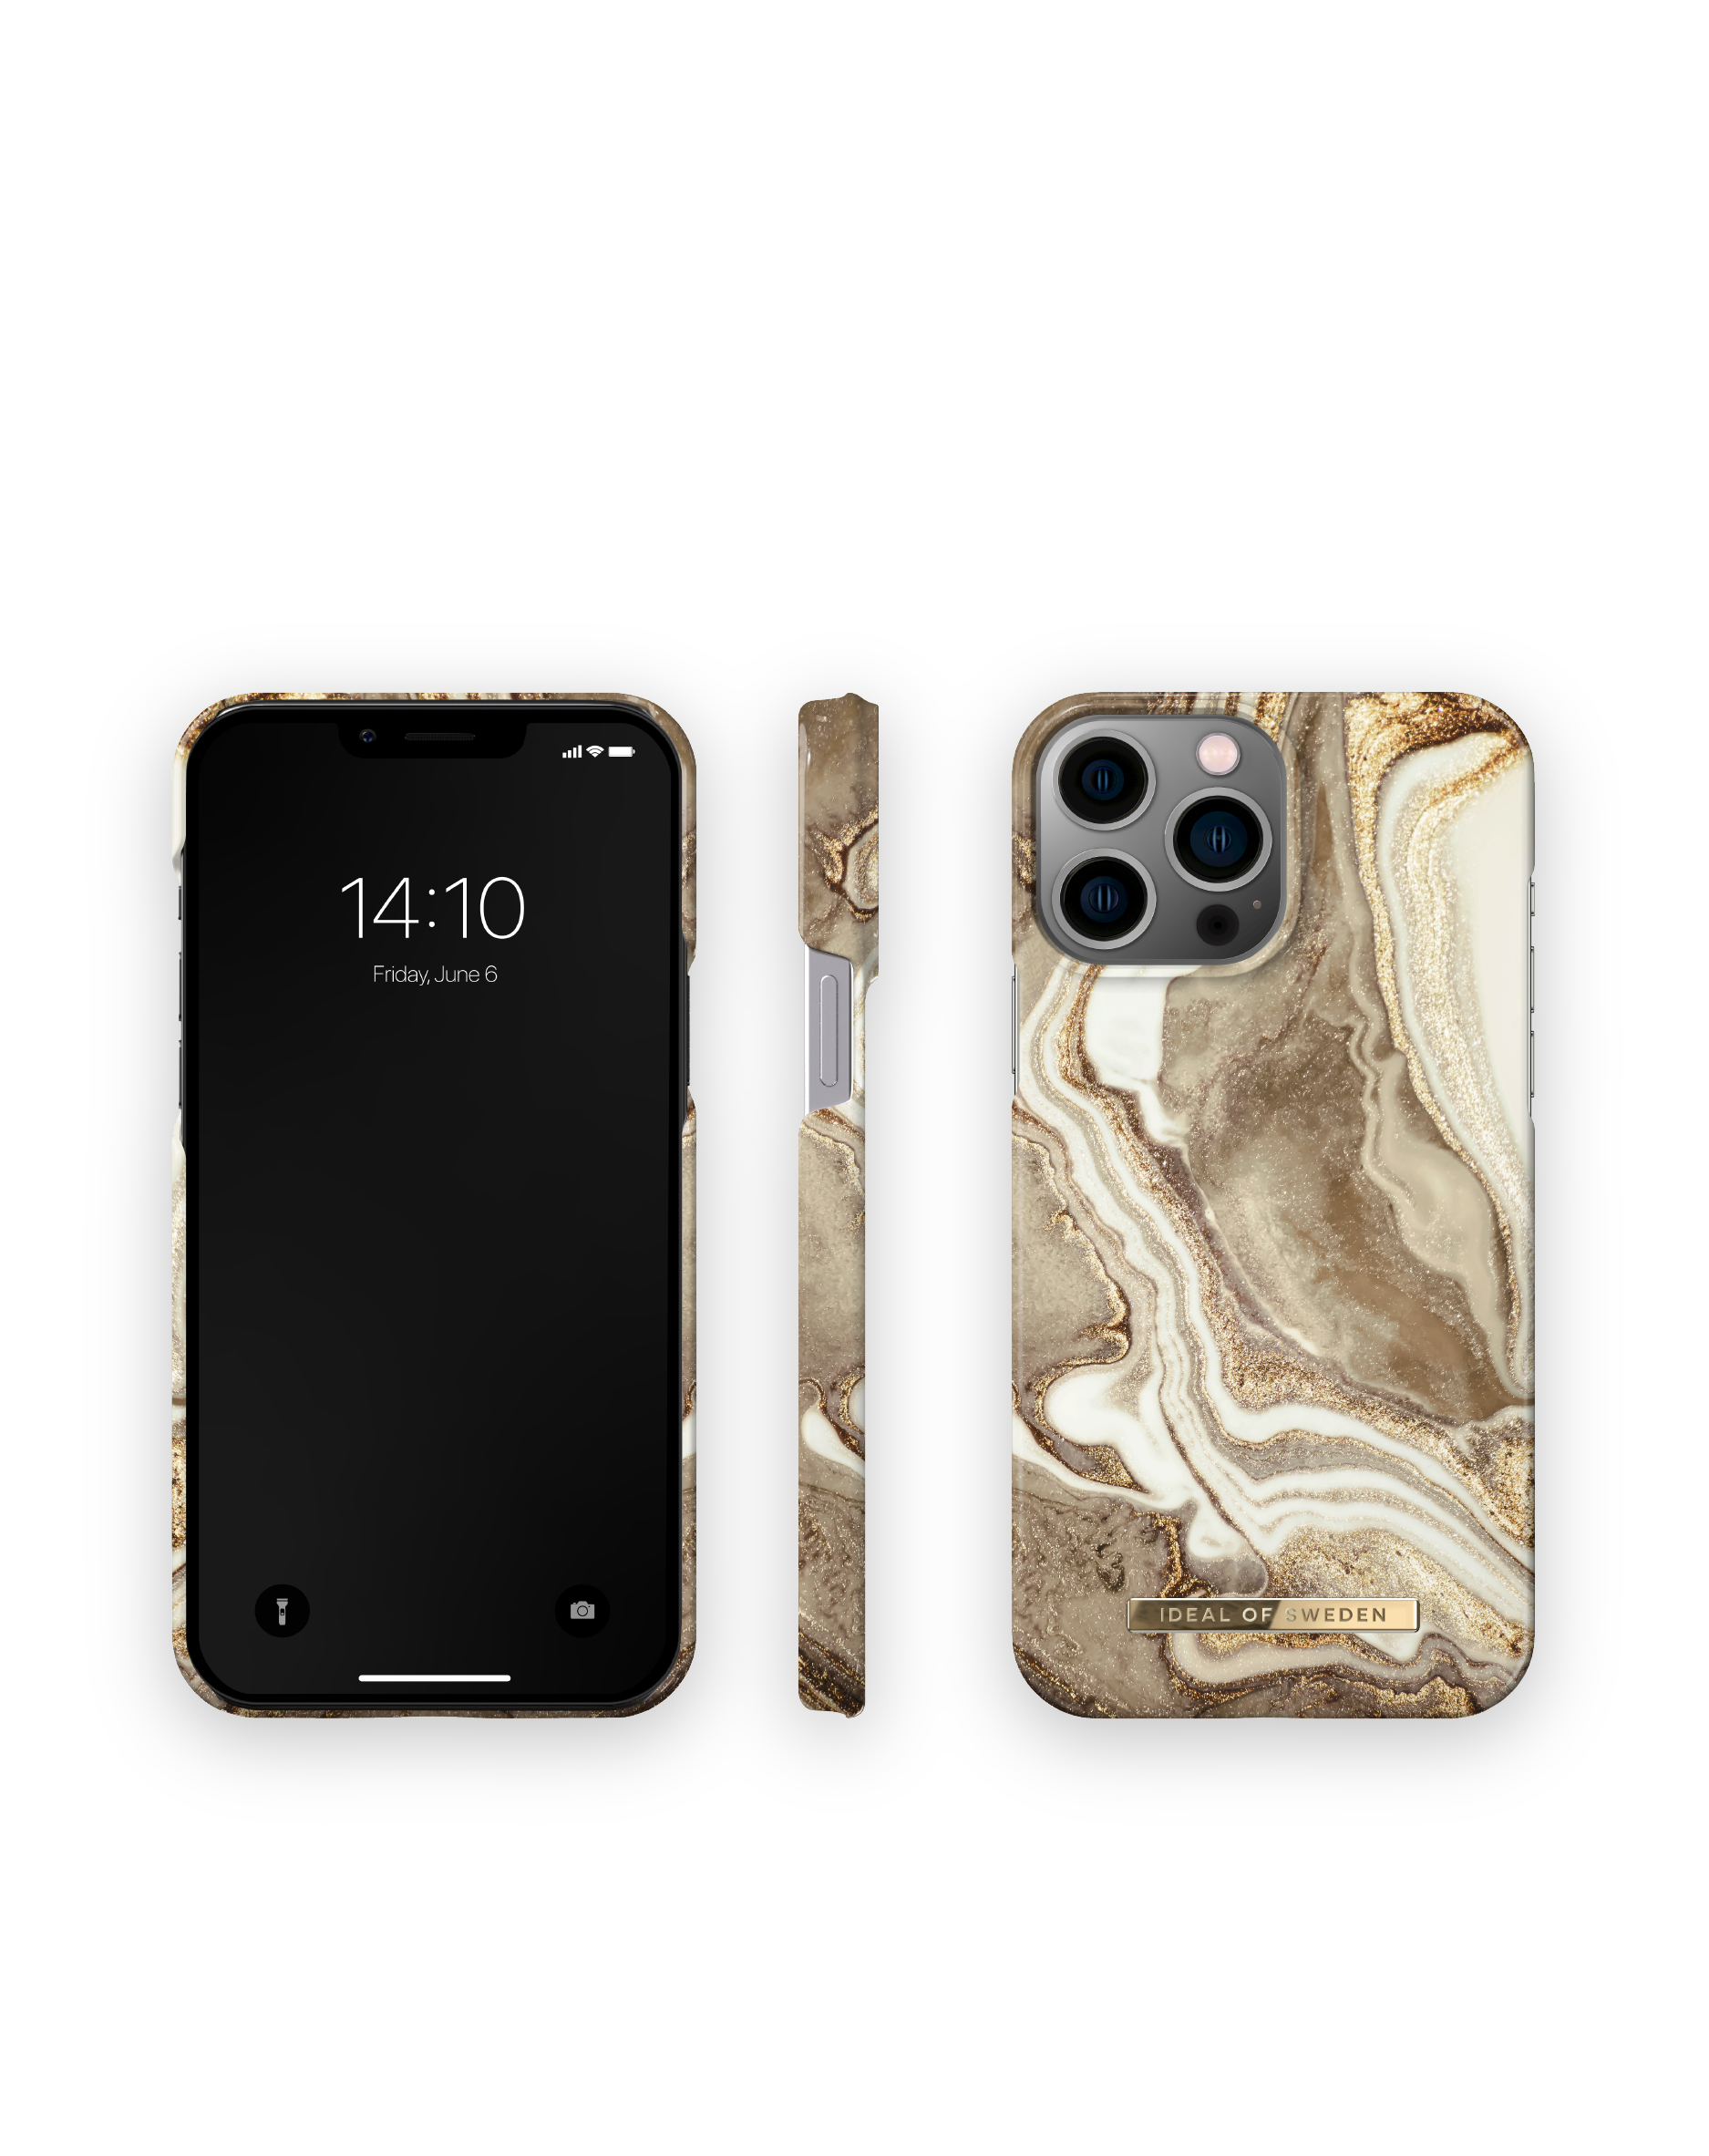 Apple, OF Marble Backcover, 13 Sand Max, IDFCGM19-I2167-164, IDEAL iPhone Golden Pro SWEDEN